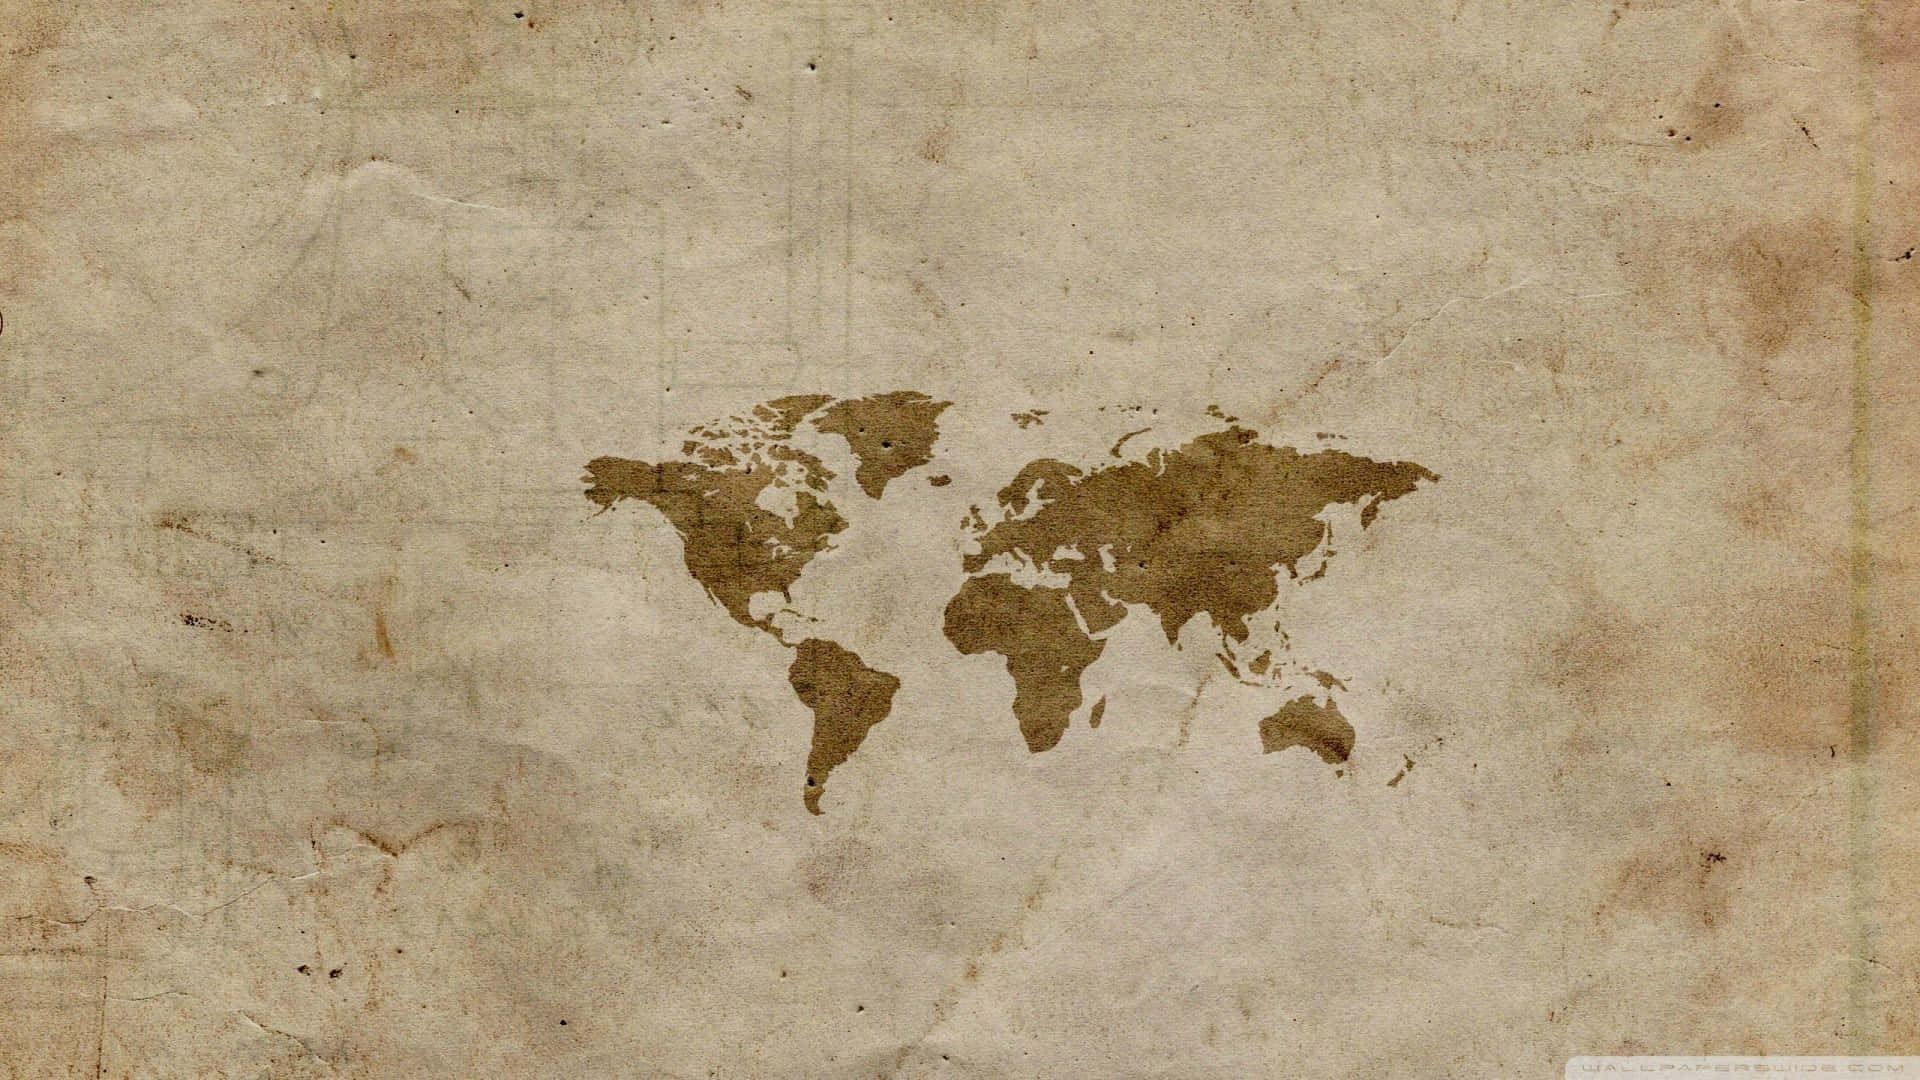 A beautiful world map showing the nations of the world Wallpaper